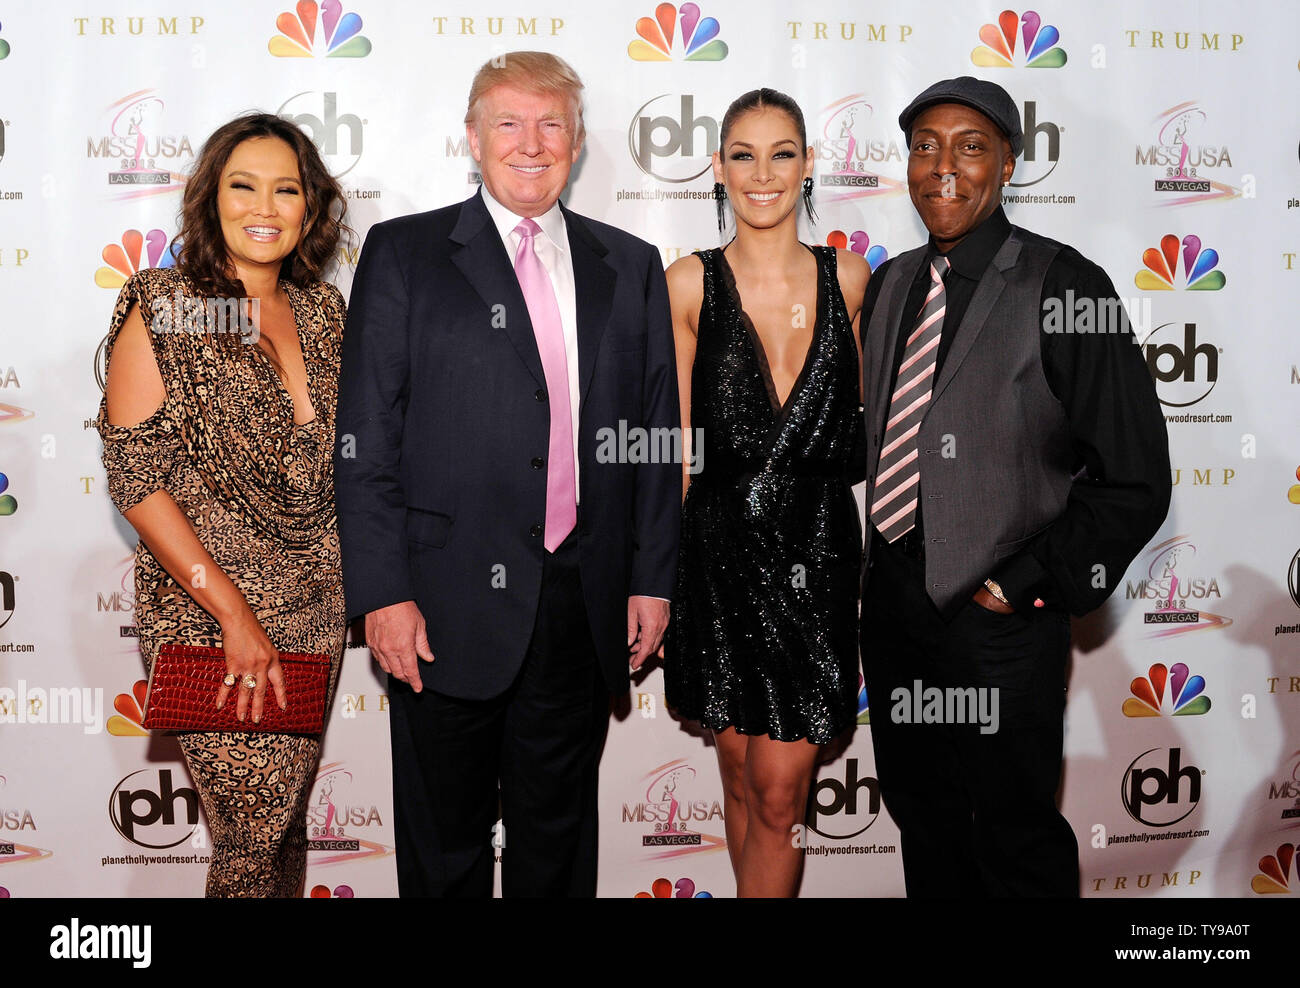 Actress from left, Tia Carrere, Donald Trump, Miss Universe 2008 Dayana Mendoza and actor Arsenio Hall arrive at the 2012 Miss USA competition at the Planet Hollywood Resort and Casino in Las Vegas, Nevada on June 3, 2012.  UPI/David Becker Stock Photo